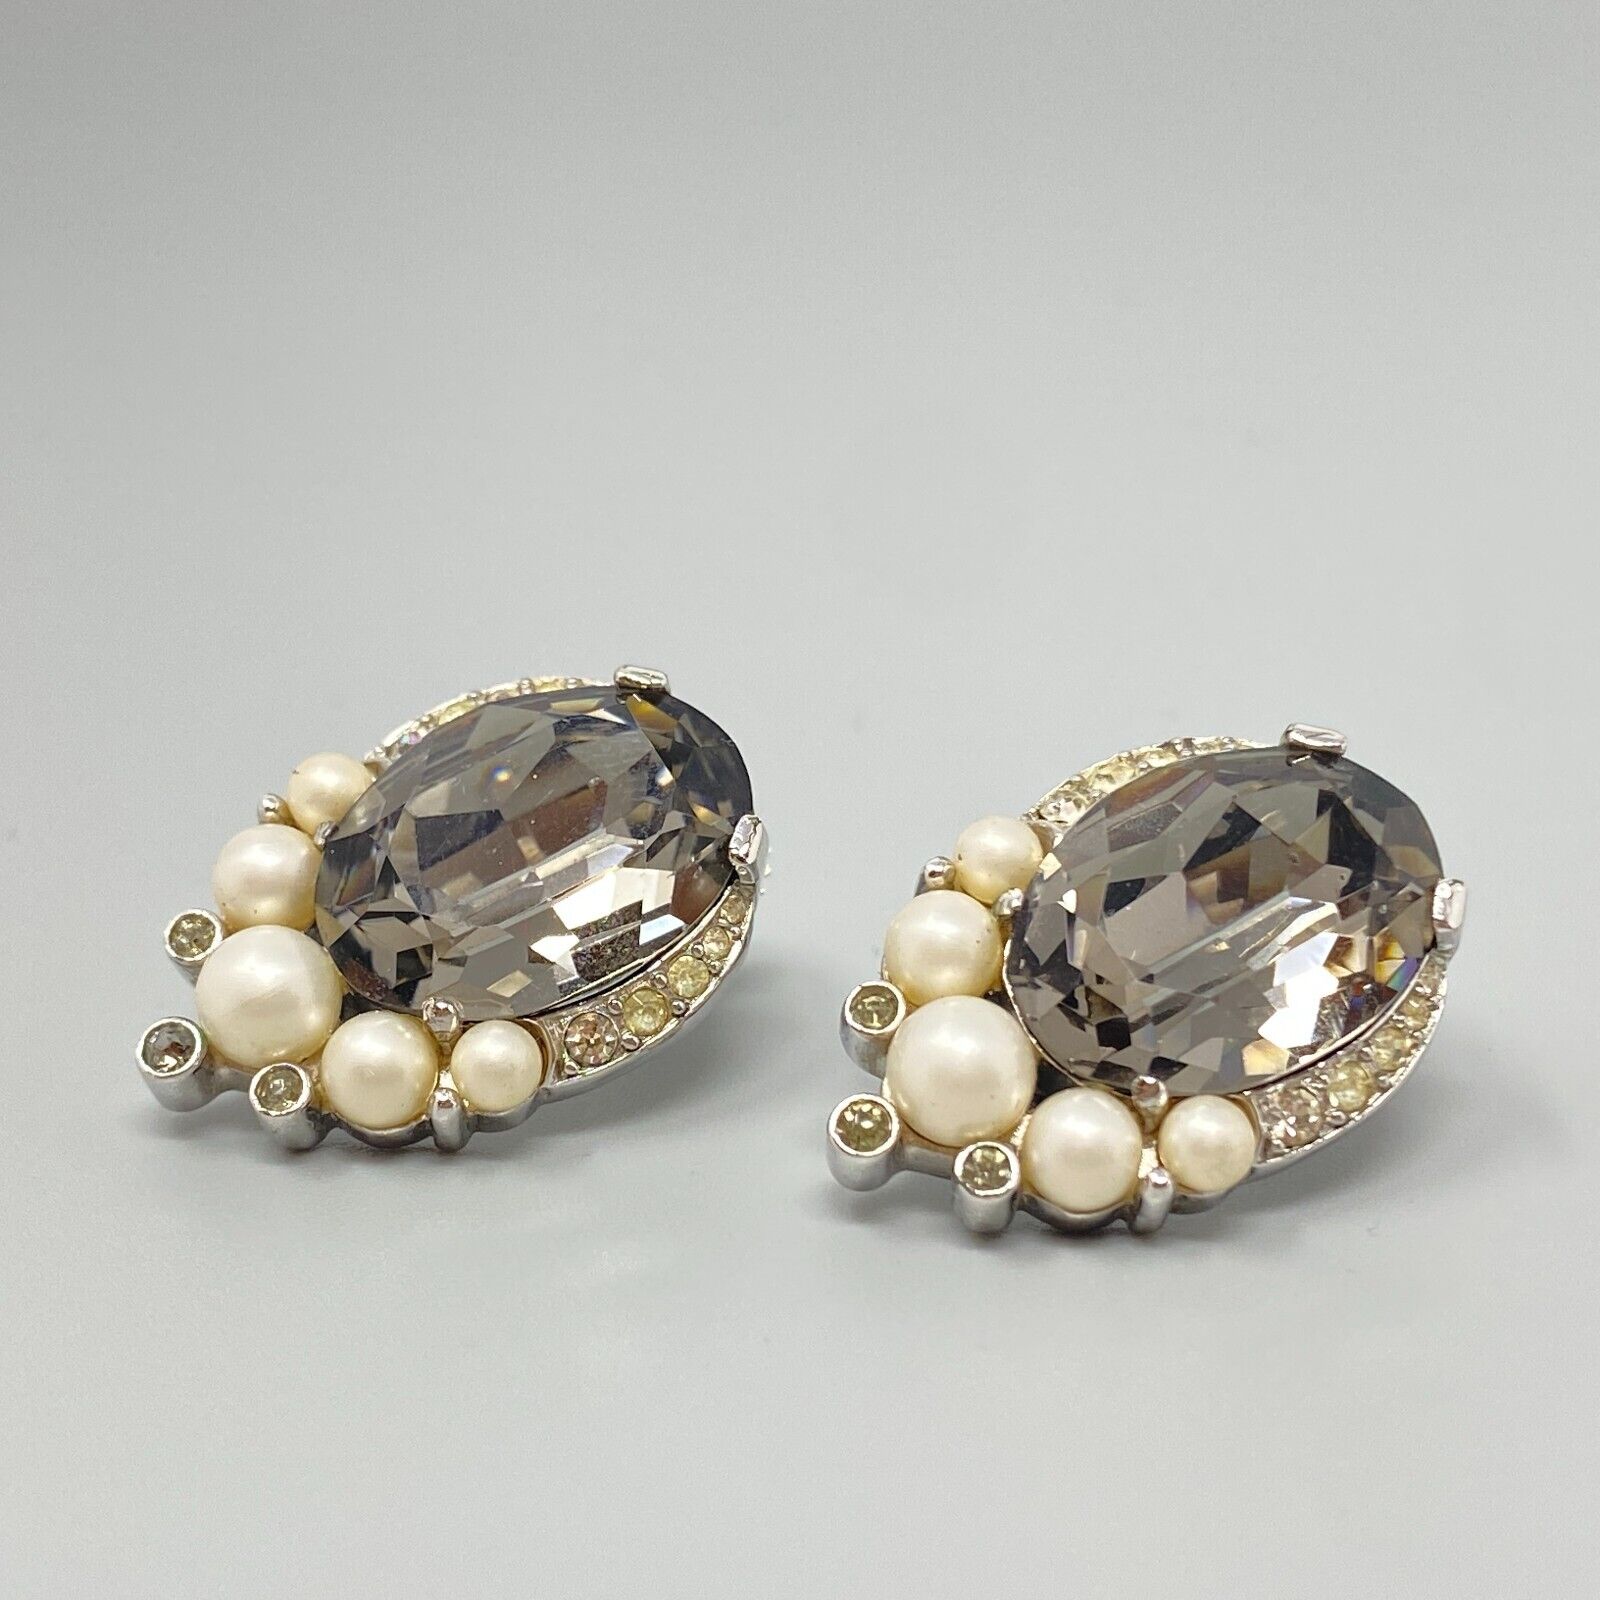 Trifari Golden metal and faux pearls with small rhinestones